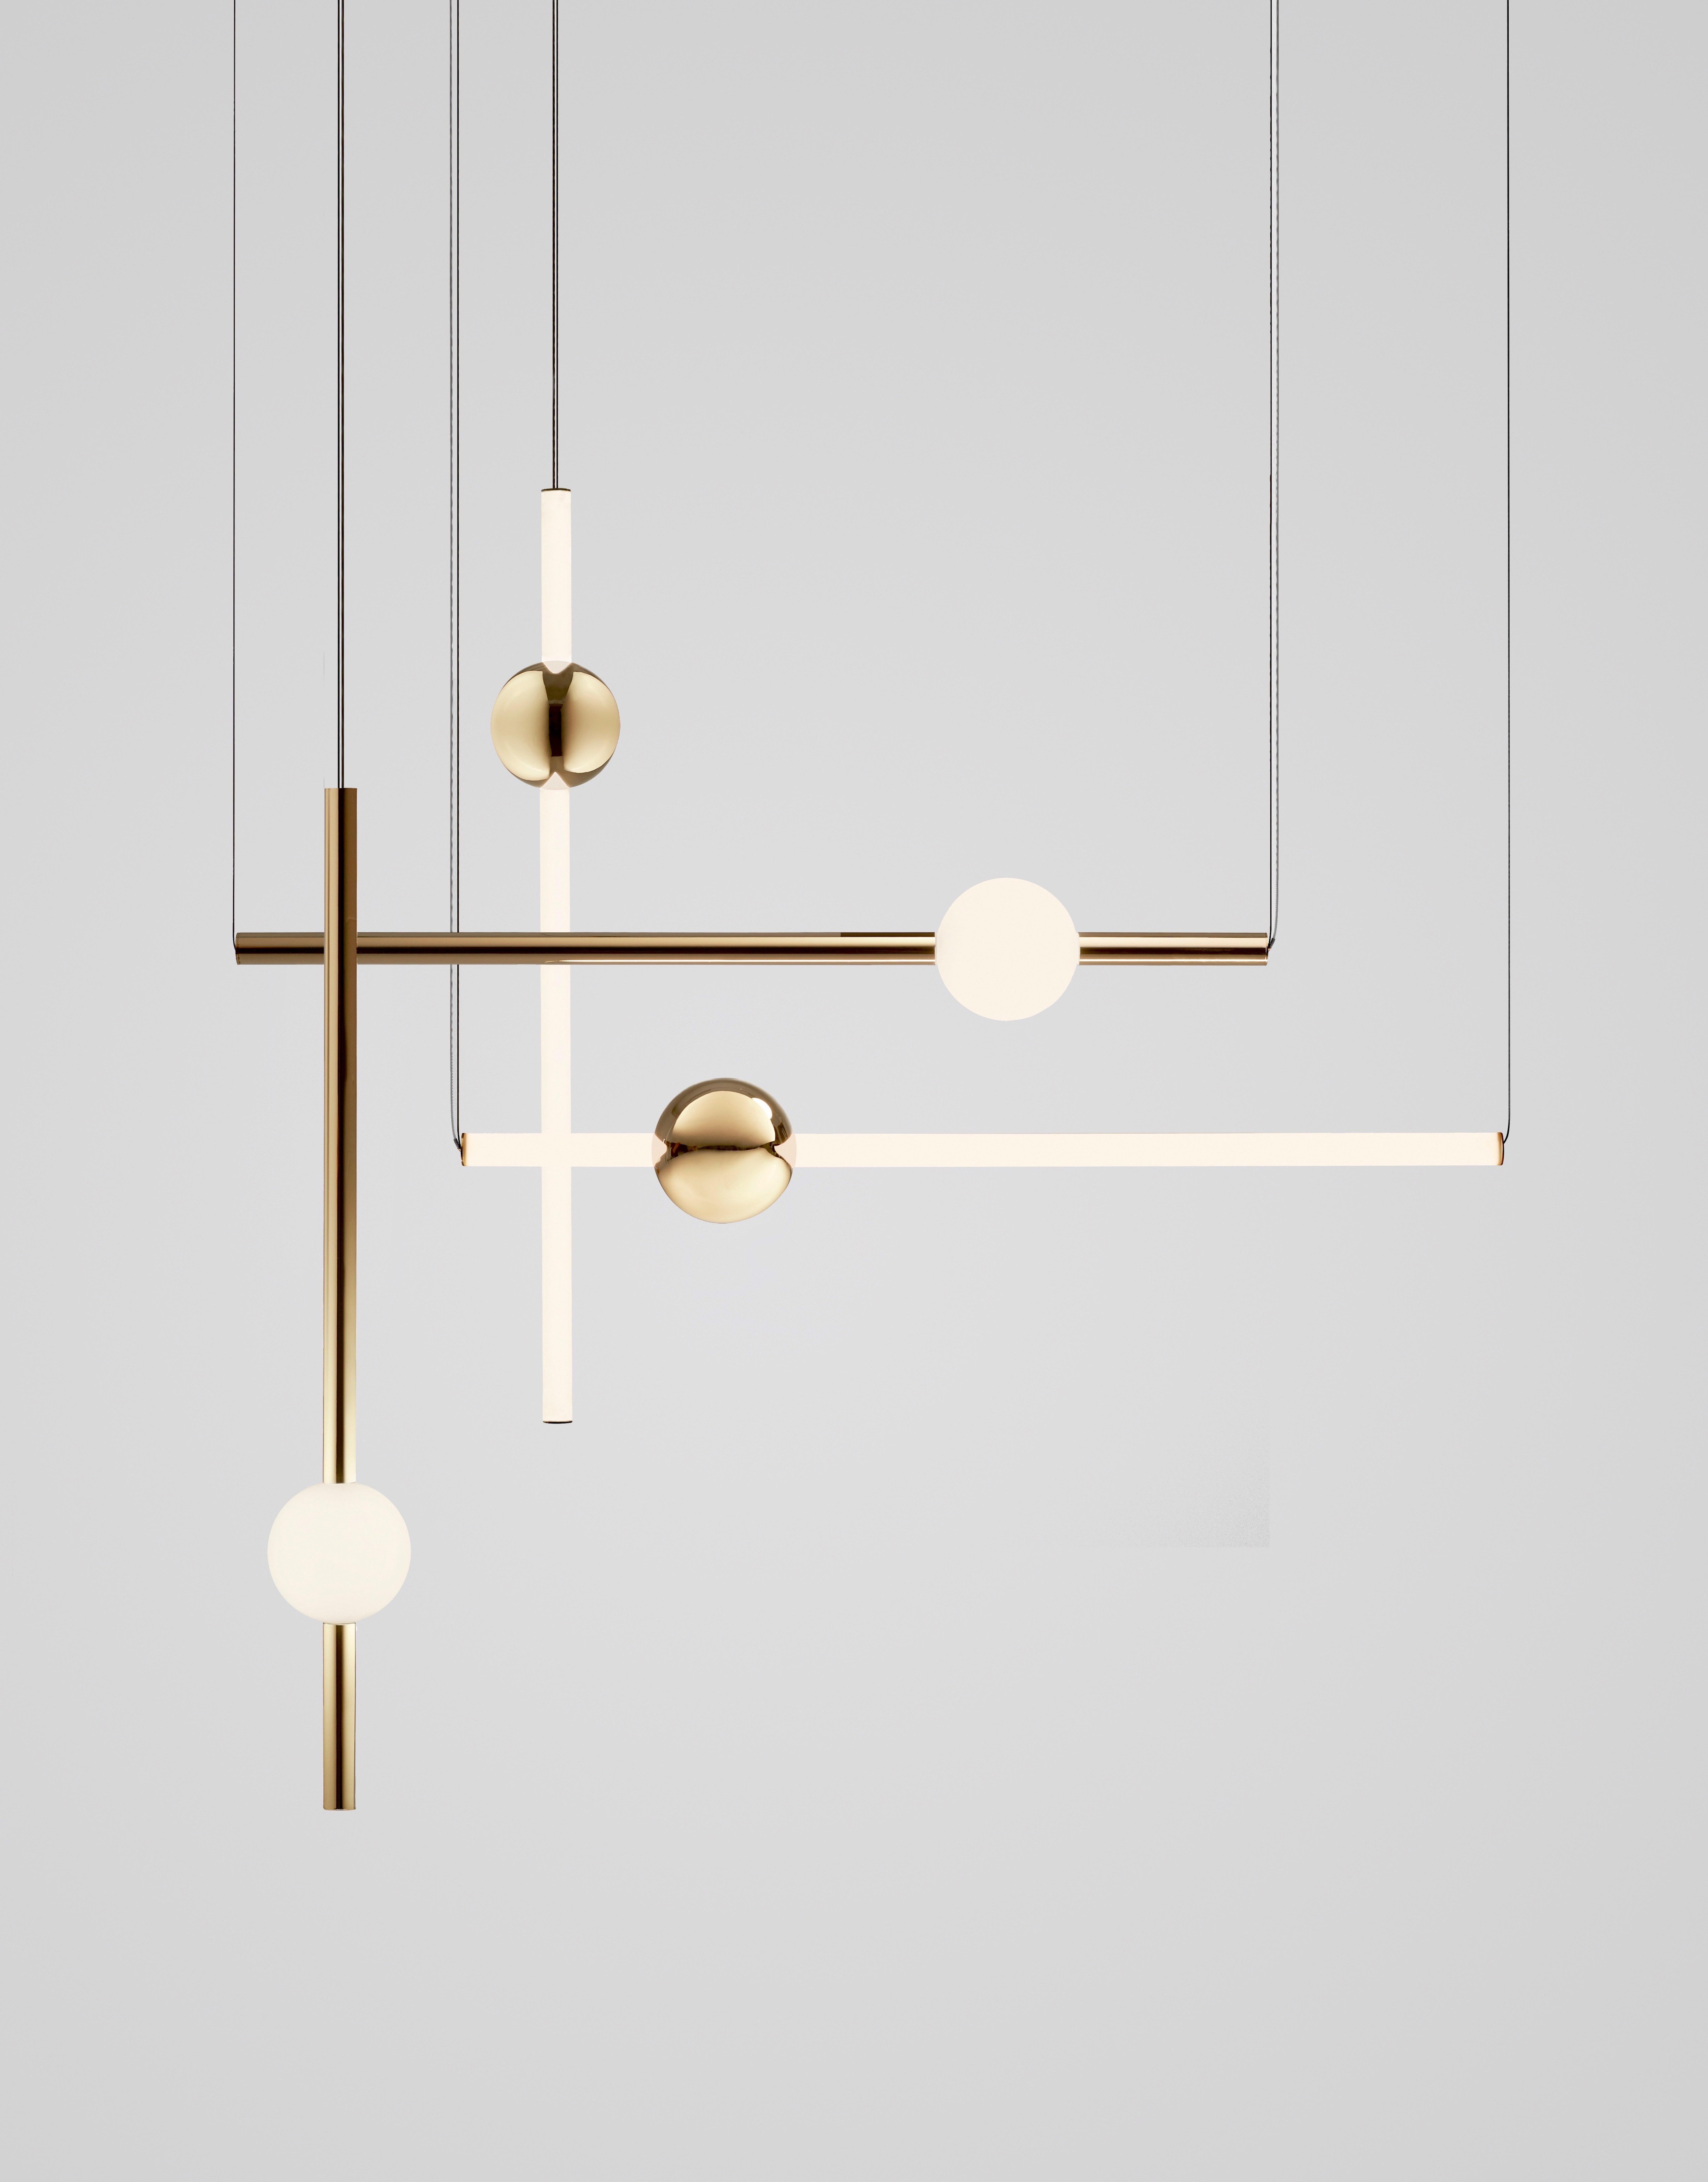 Orion comprises simple modular lights with opposing opaque and solid polished gold spheres along with opaque and solid gold tubes. 
These connect and expand horizontally and vertically to create bespoke constellations of light with infinite